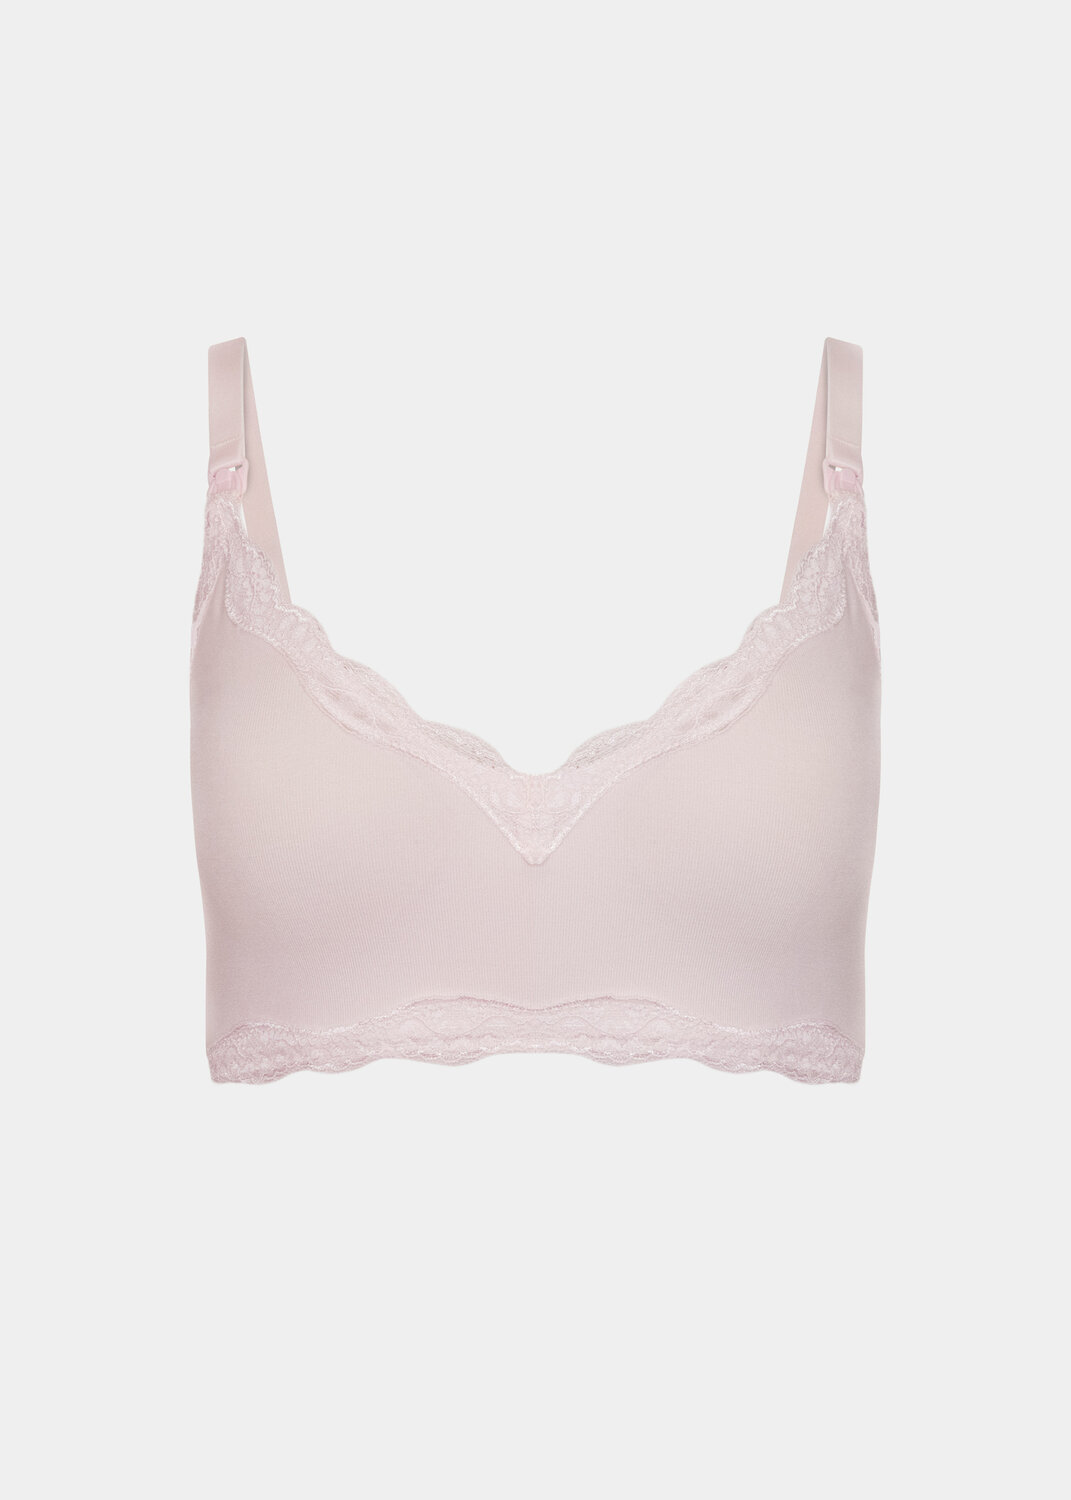 New Look lace bralette in light pink